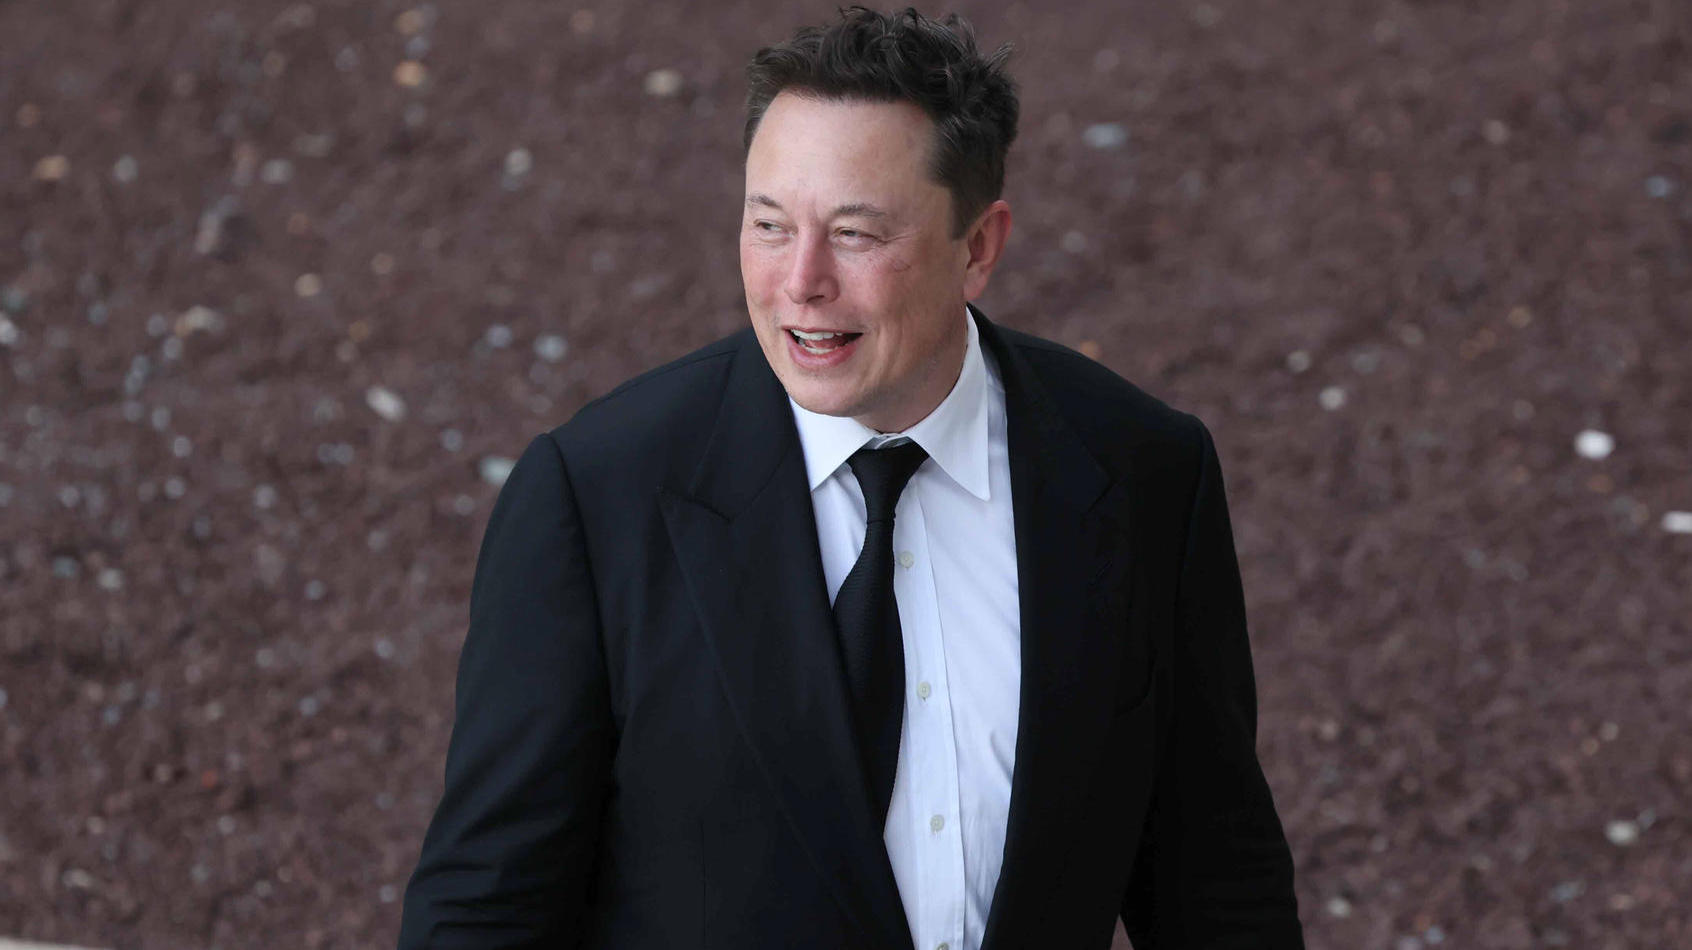 Tesla CEO could become the first billionaire in history